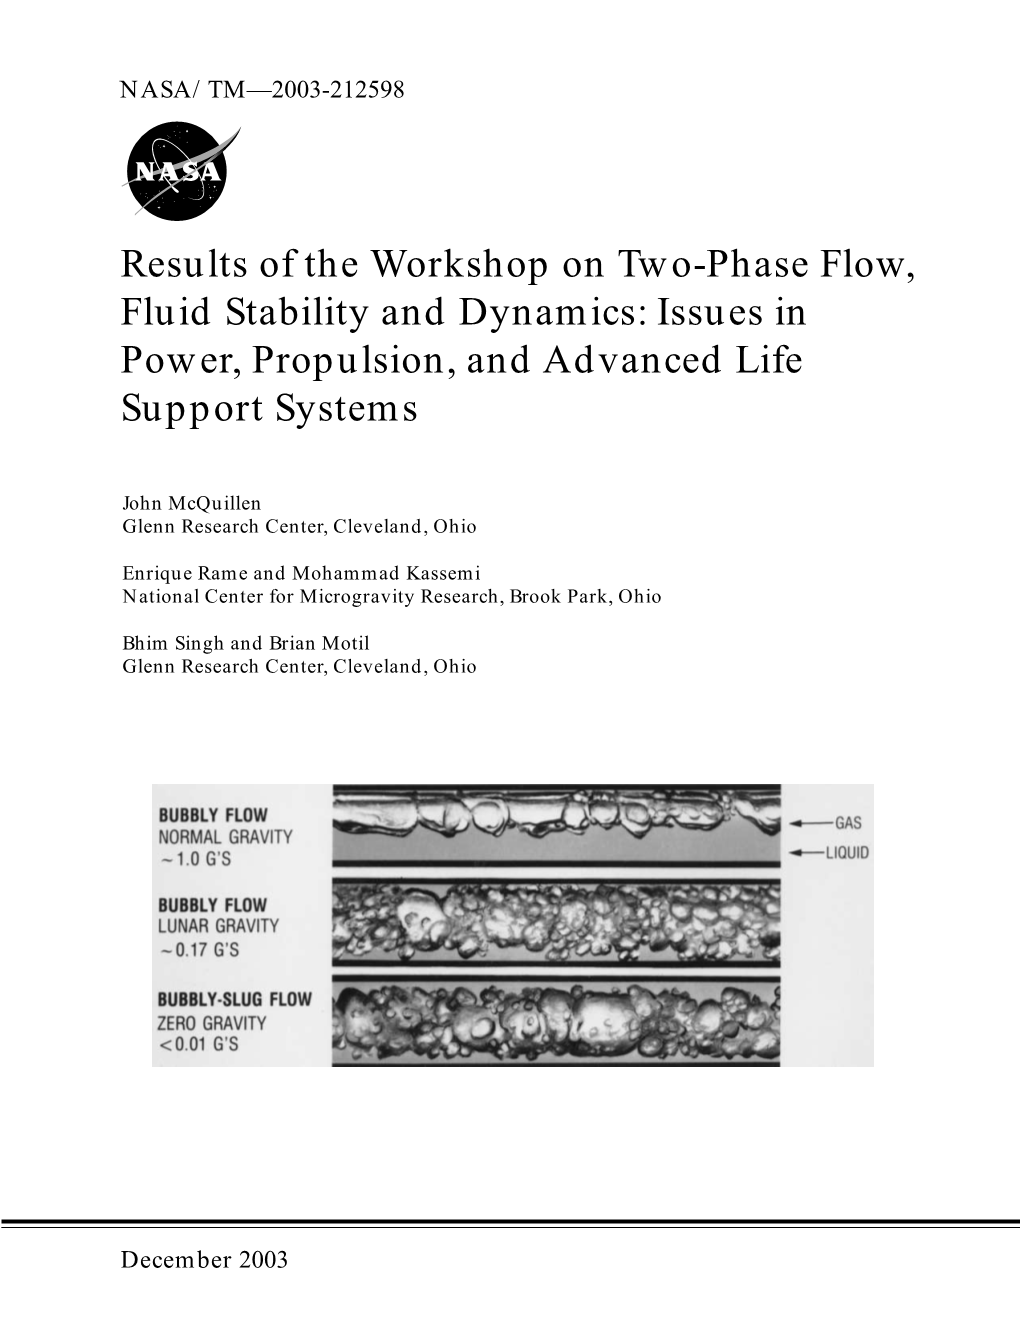 Two Phase Flow in Power and Propulsion Workshop